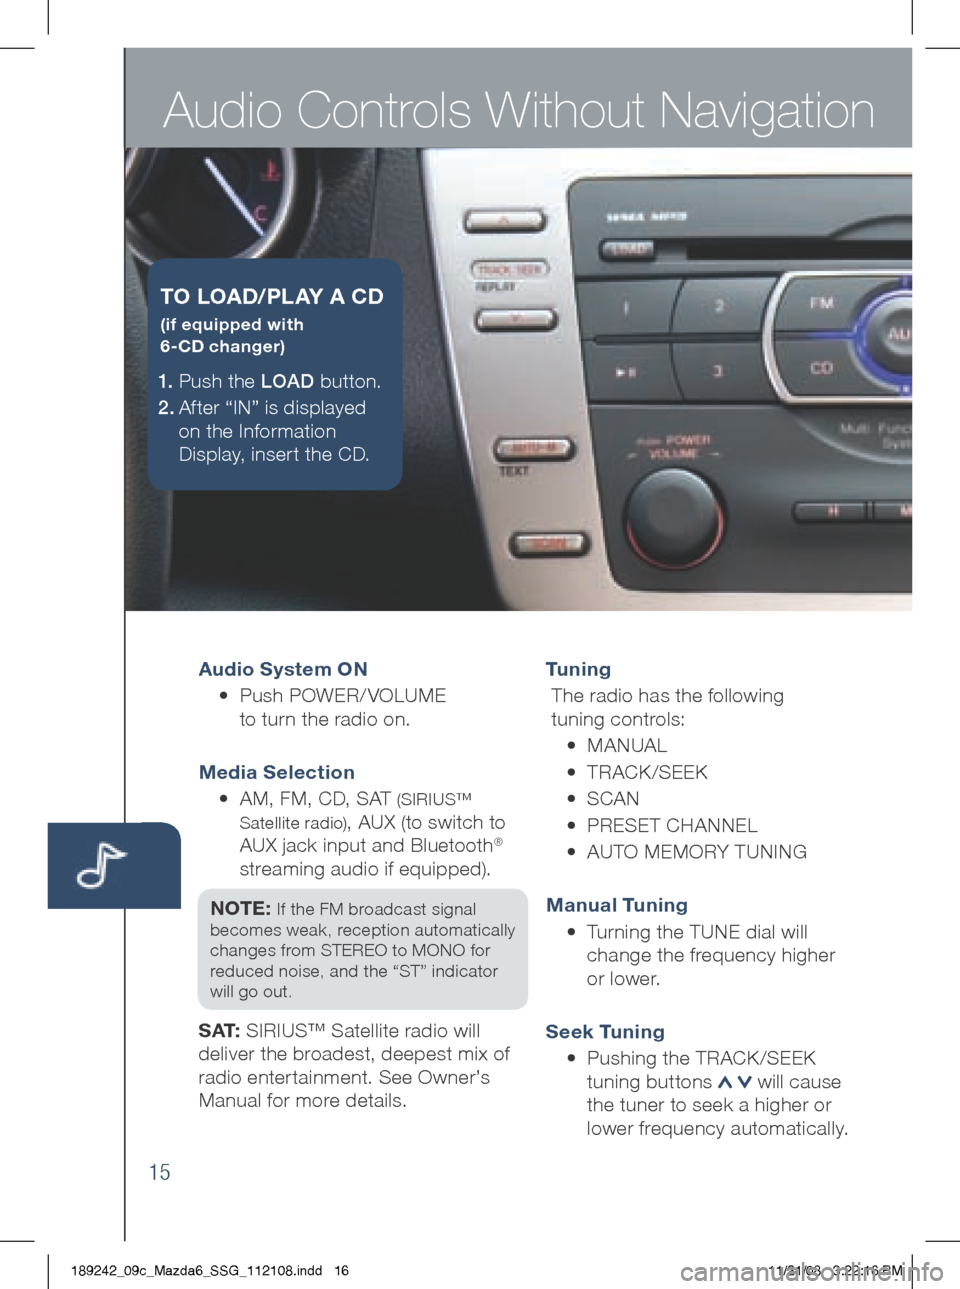 MAZDA MODEL 6 2009  Smart Start Guide (in English) Audio Controls Without Navigation
15
Audio System ON 
	 •		 Push	POWER/ VOLUME  
to 	turn 	the 	radio 	on.	
Media Selection 
	 •	 		 AM,	FM,	CD,	SAT	
(SIRIUS™	
Satellite 	radio)
,	AUX 	(to 	swit